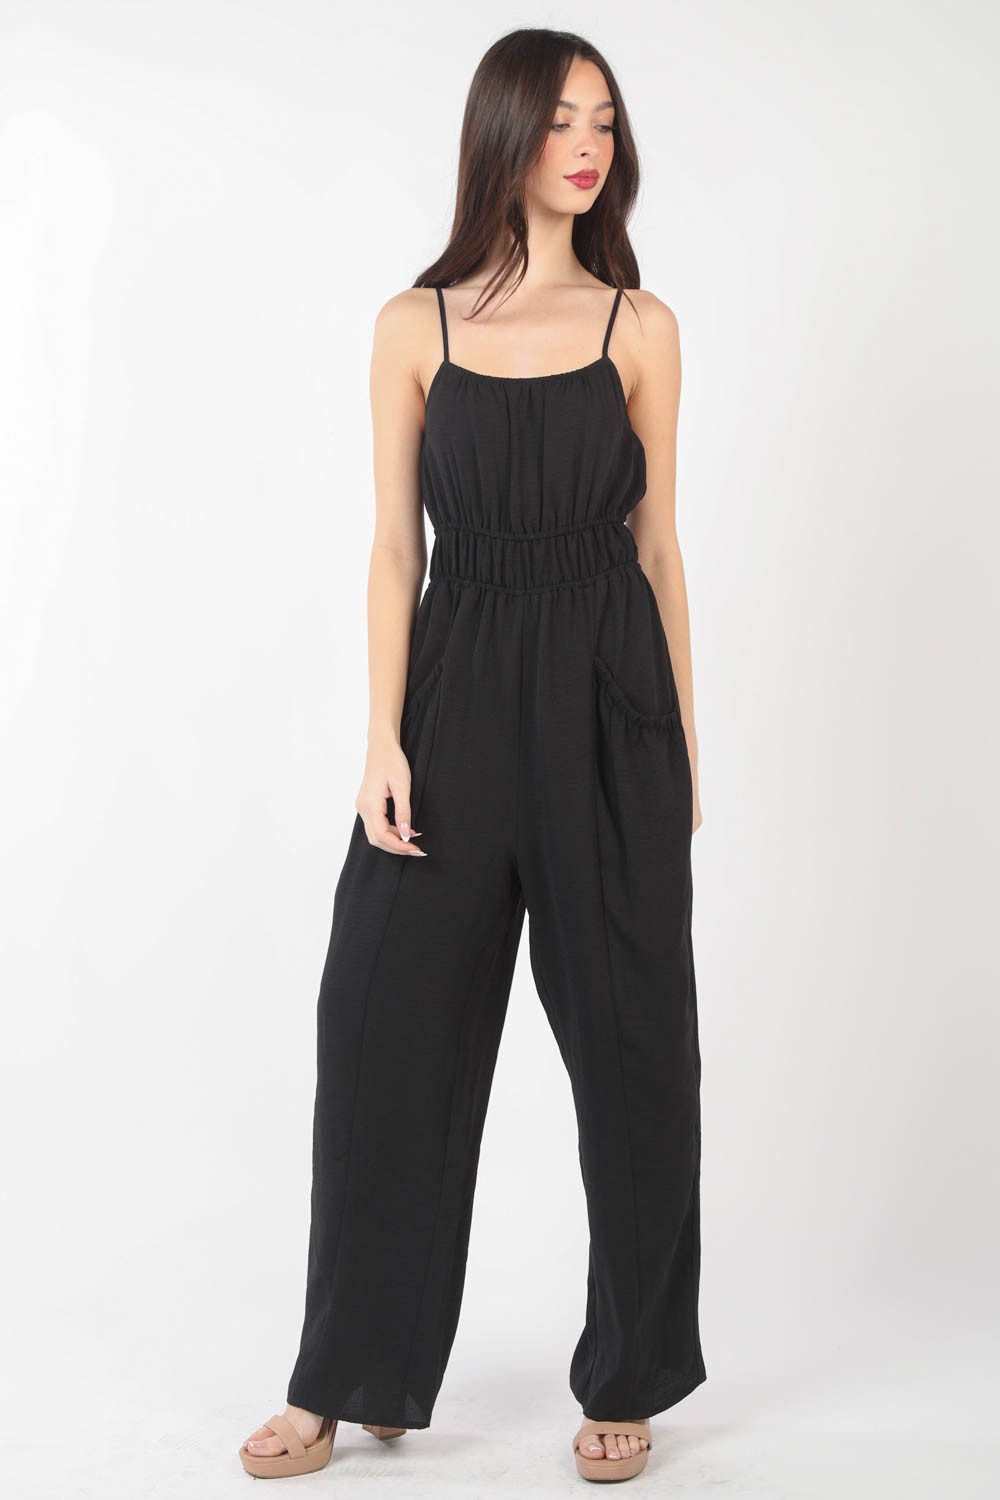 This Pintuck Detail Woven Sleeveless Jumpsuit is a chic and versatile piece for your wardrobe. The pintuck detailing adds a touch of sophistication to the sleeveless jumpsuit silhouette. Made from woven fabric, this jumpsuit offers a sleek and polished look.S - L